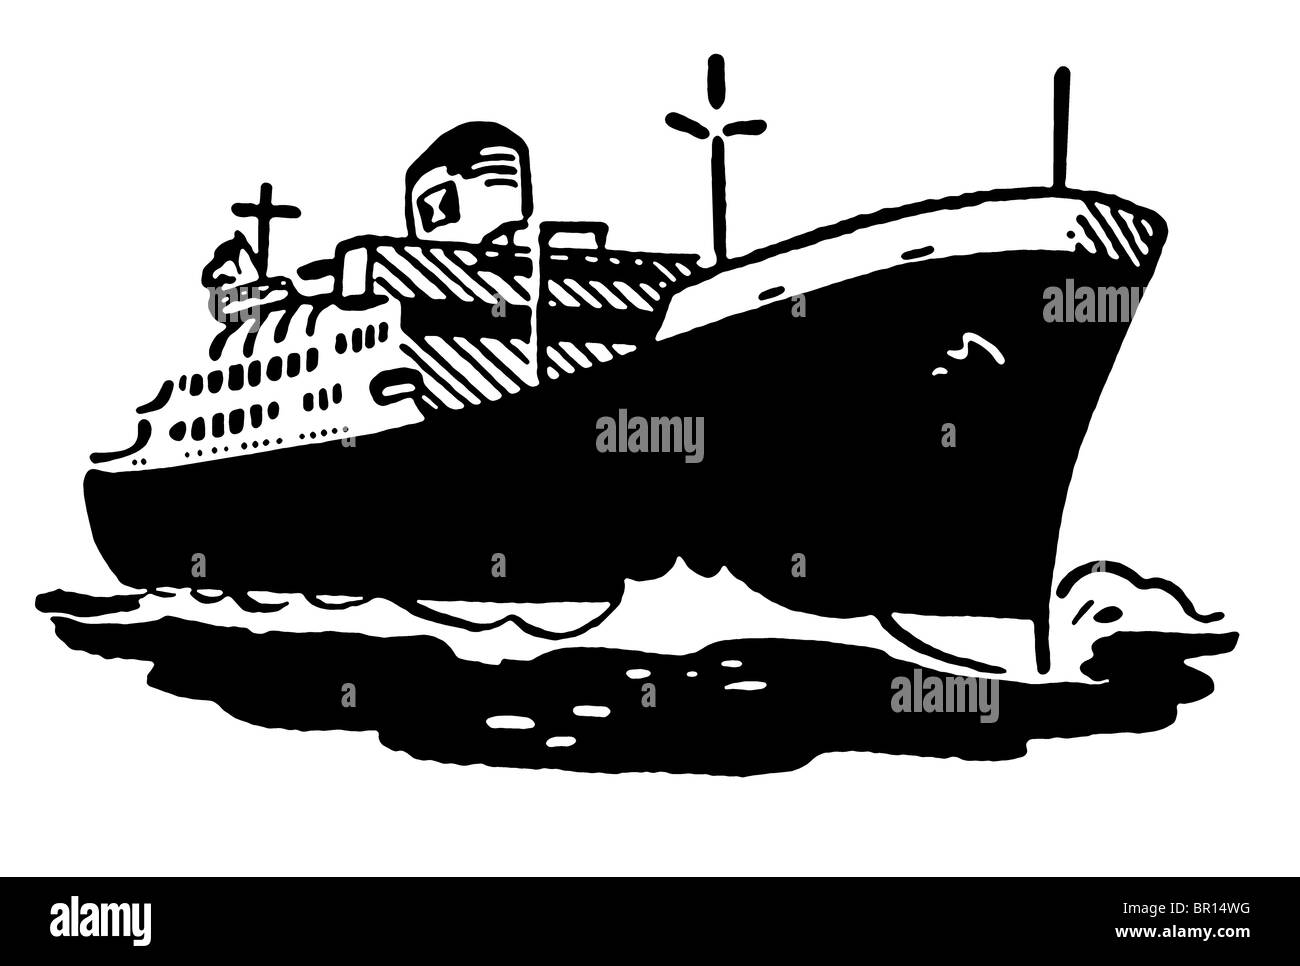 A black and white version of a vintage illustration of a ship Stock Photo